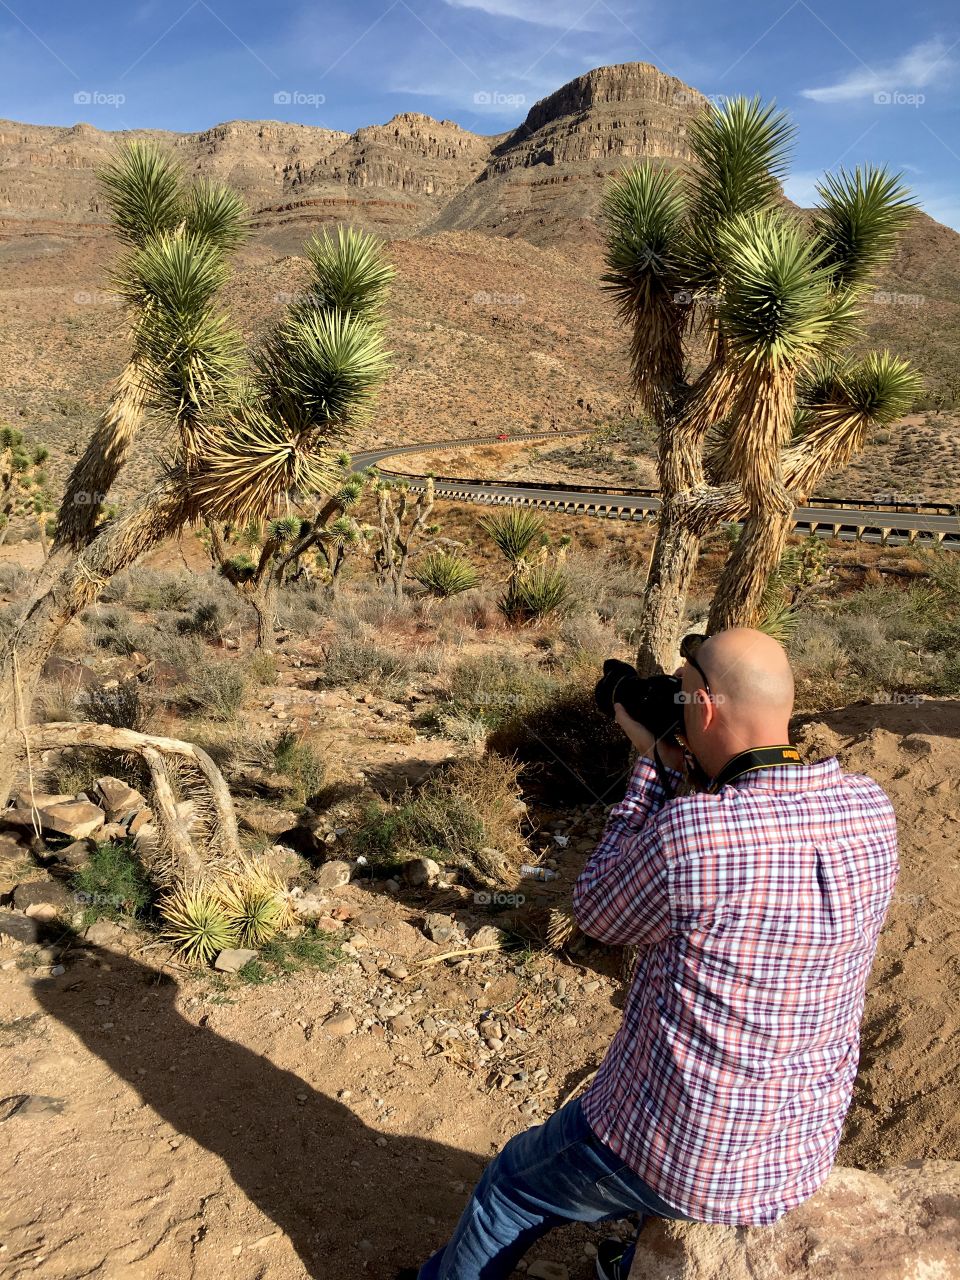 Taking a picture of a cactus